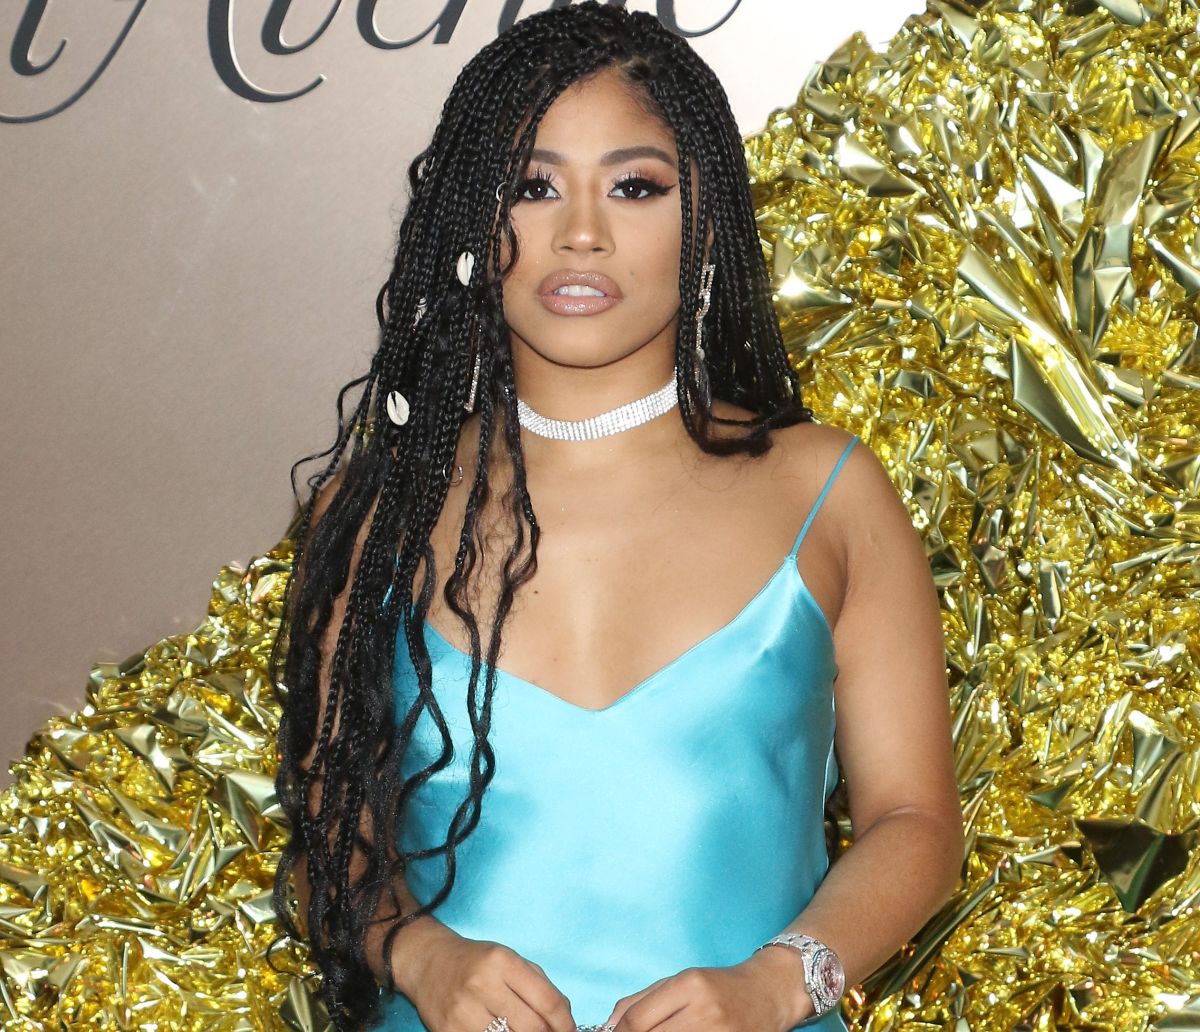 NEW YORK, NEW YORK - SEPTEMBER 05: Hennessy Carolina attends the Vanity Fair's 2019 Best Dressed List at L'Avenue on September 05, 2019 in New York City. (Photo by Jim Spellman/Getty Images)